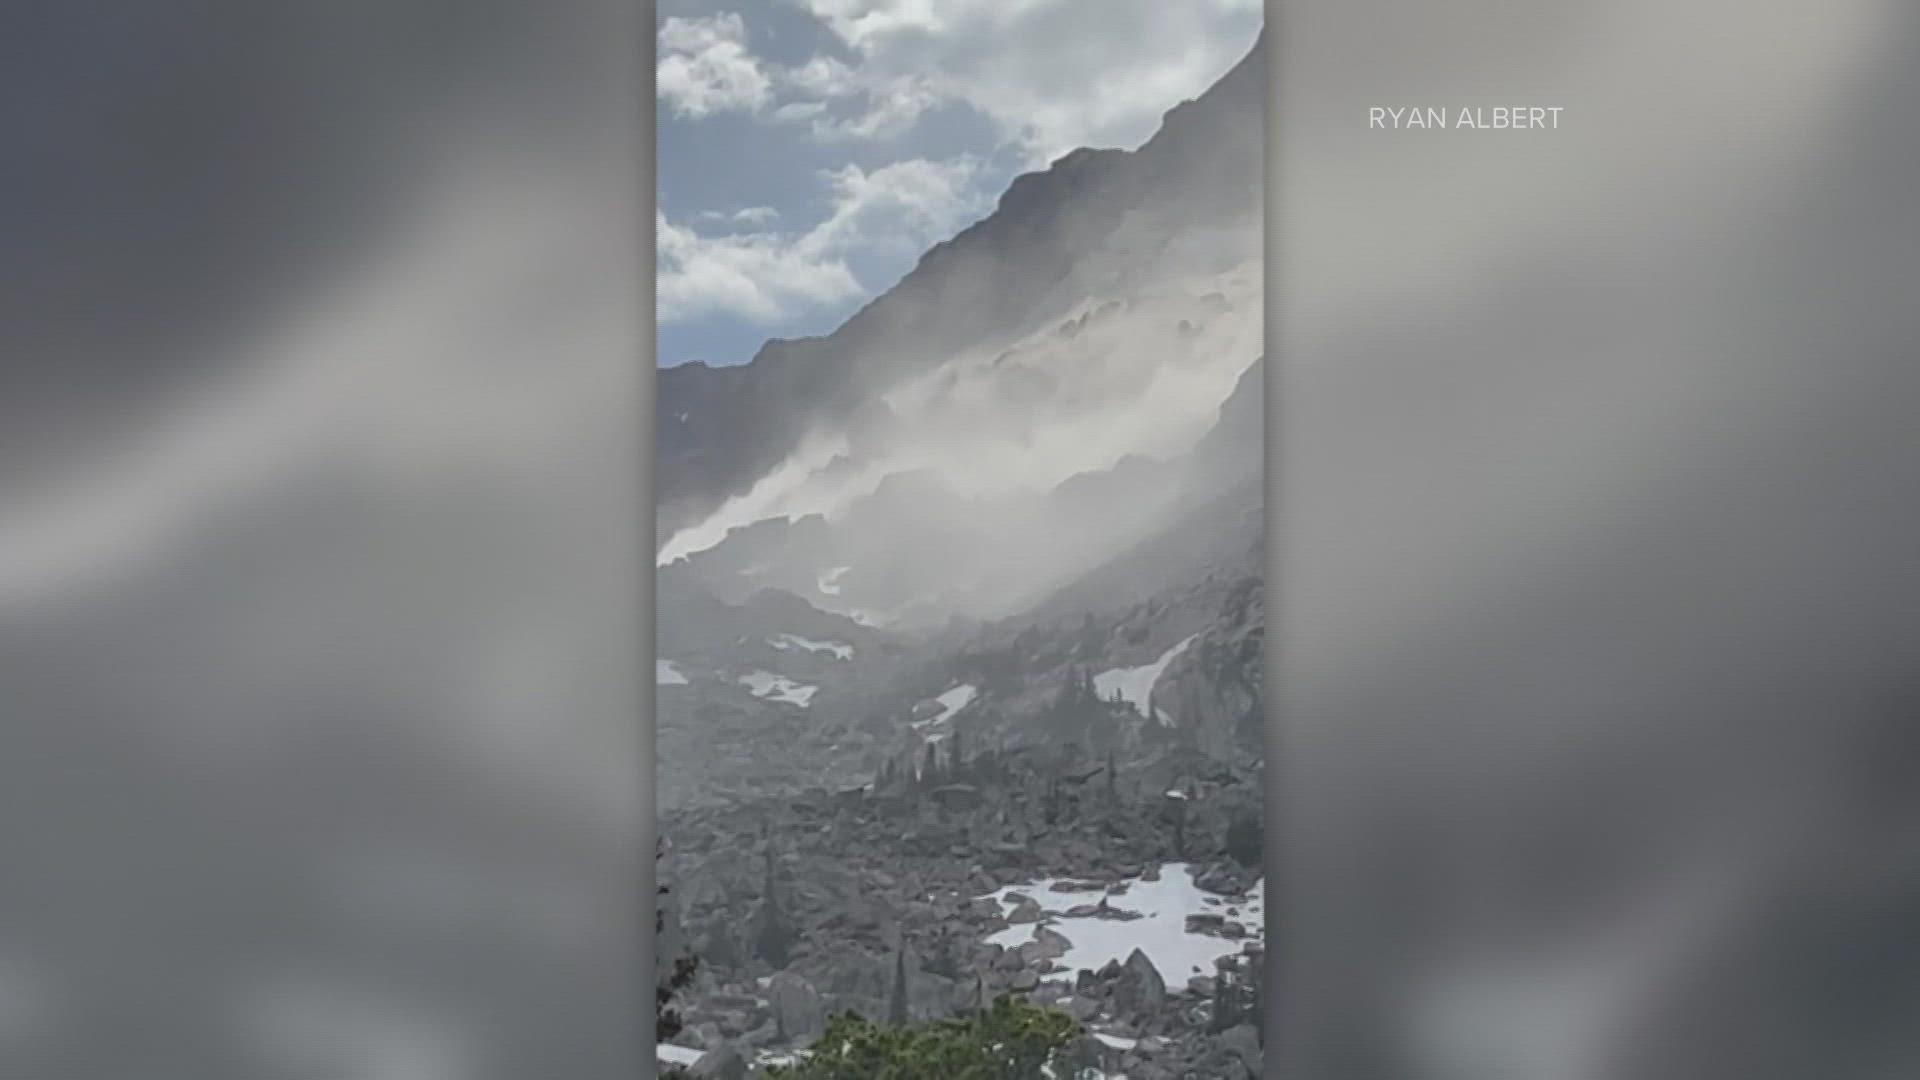 Rocky Mountain National Park experienced a large rockslide Tuesday afternoon. The park posted a picture showing parts of Hallett Peak dislodged.